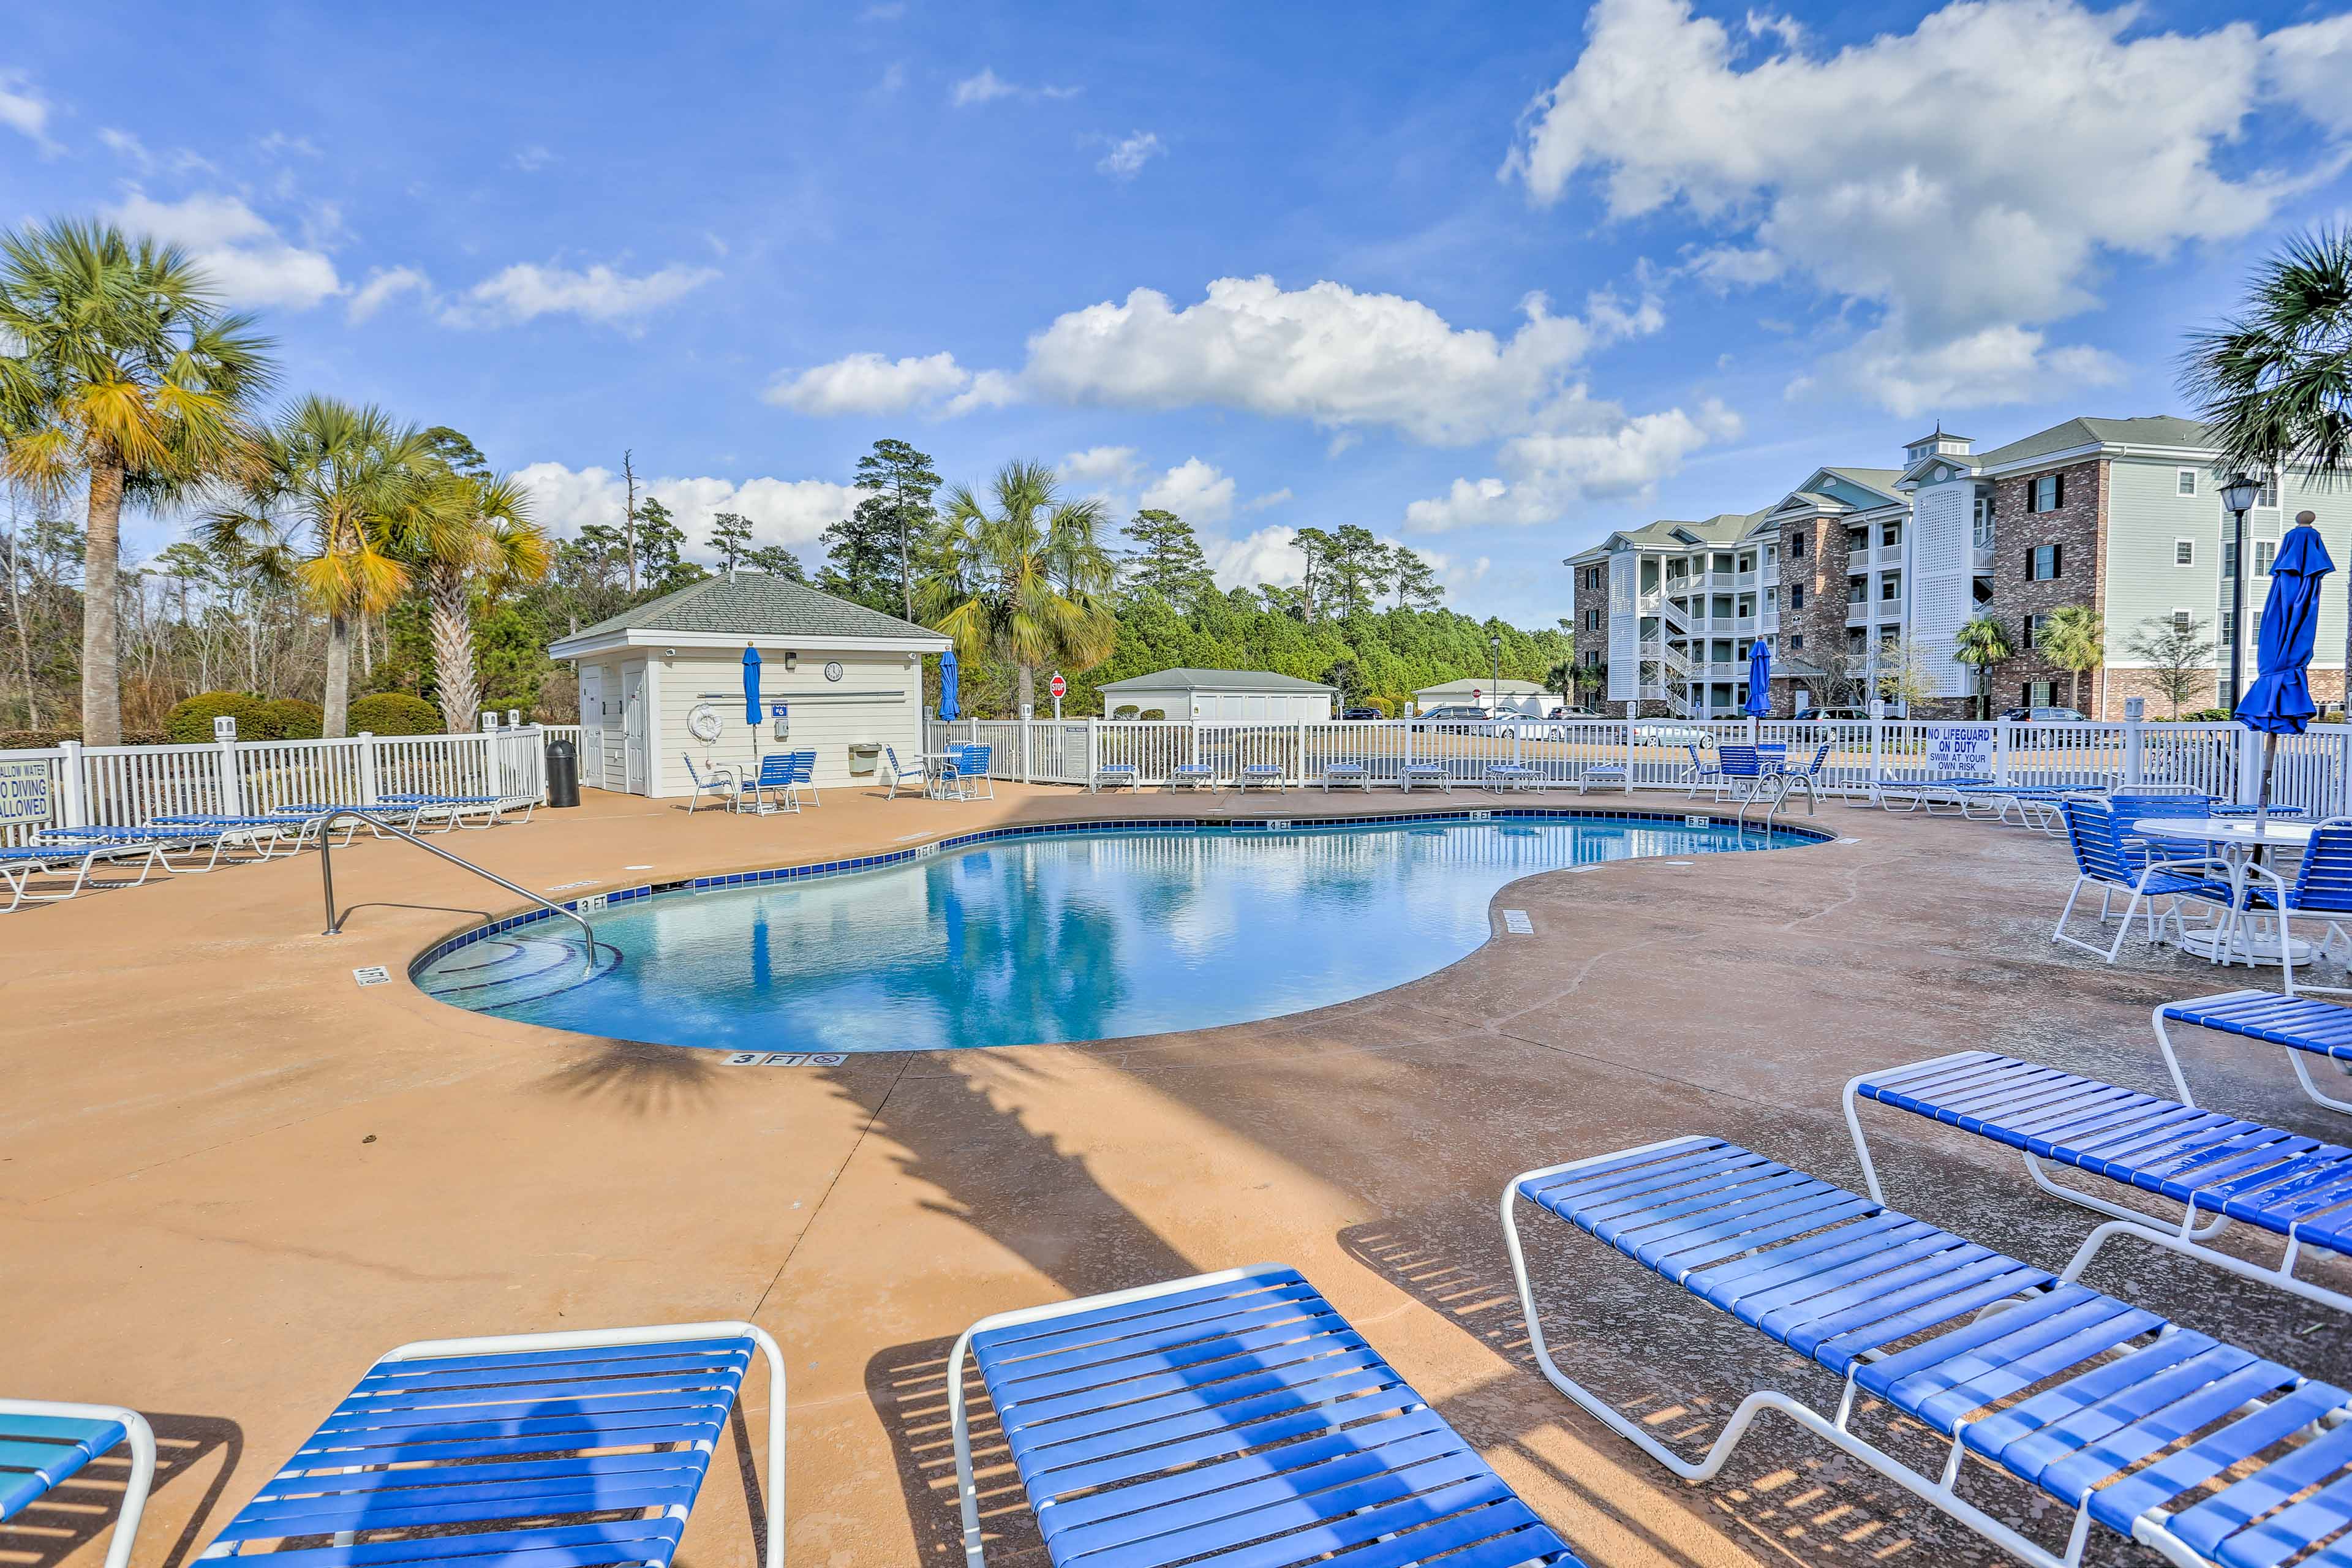 Spend leisurely days basking by the community pool.